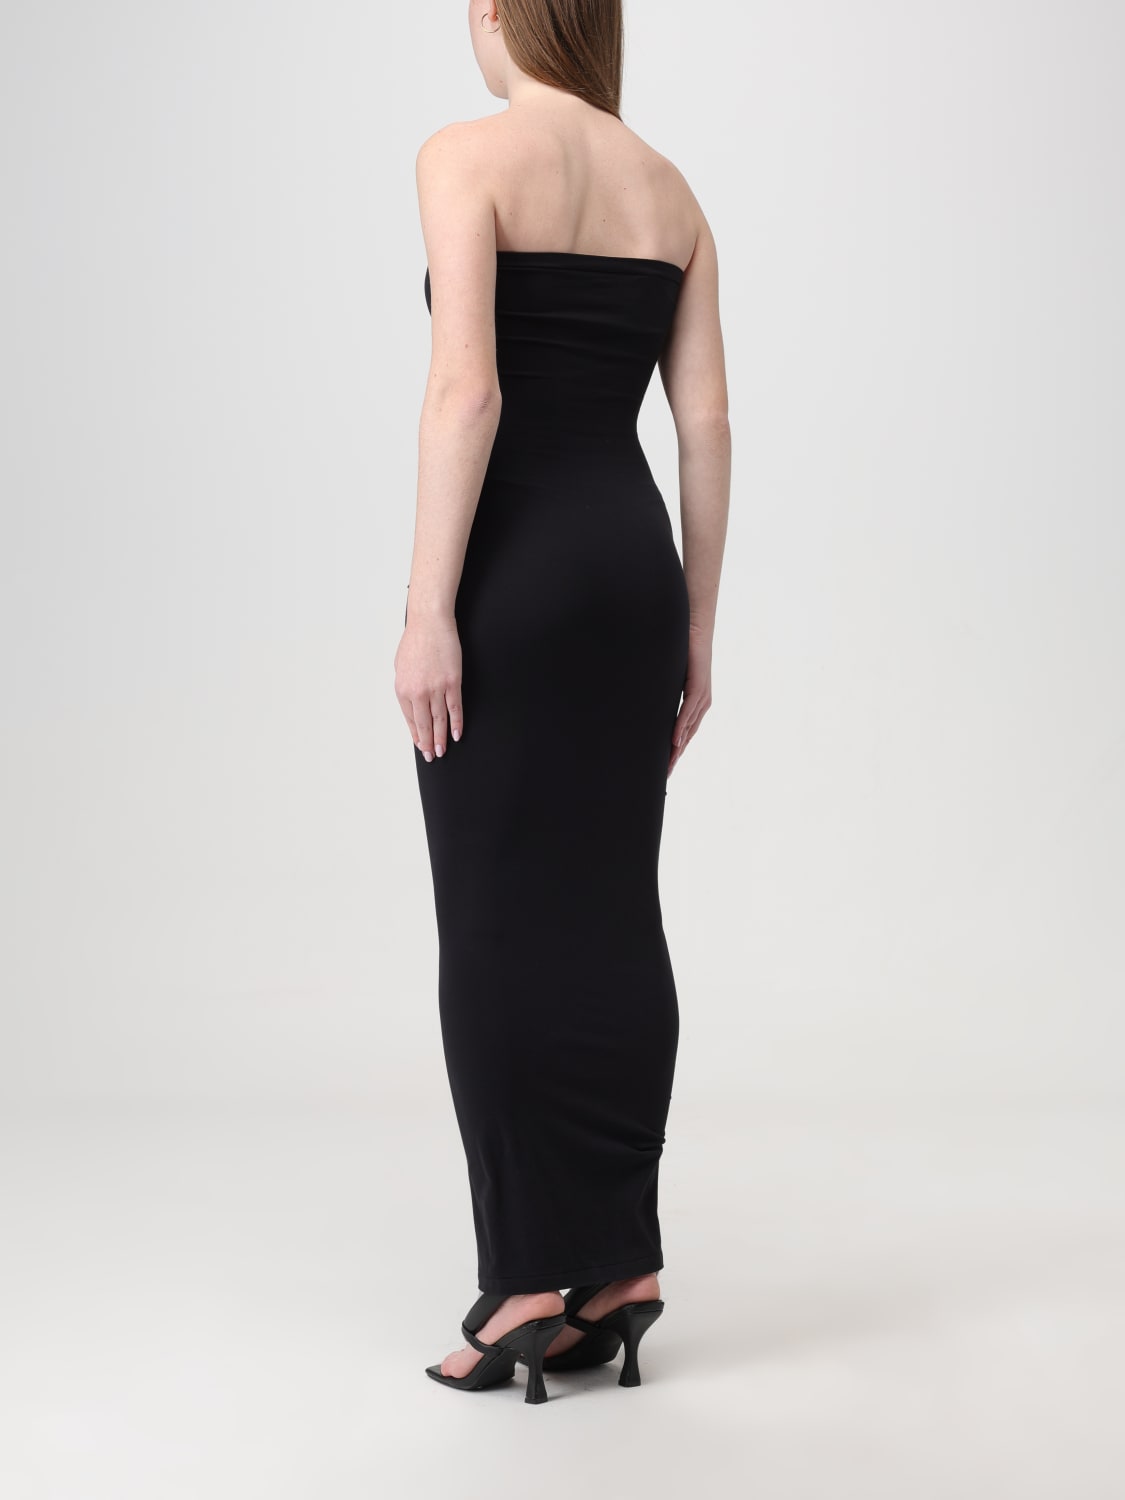 WOLFORD: dress for woman - Black  Wolford dress 50795 online at